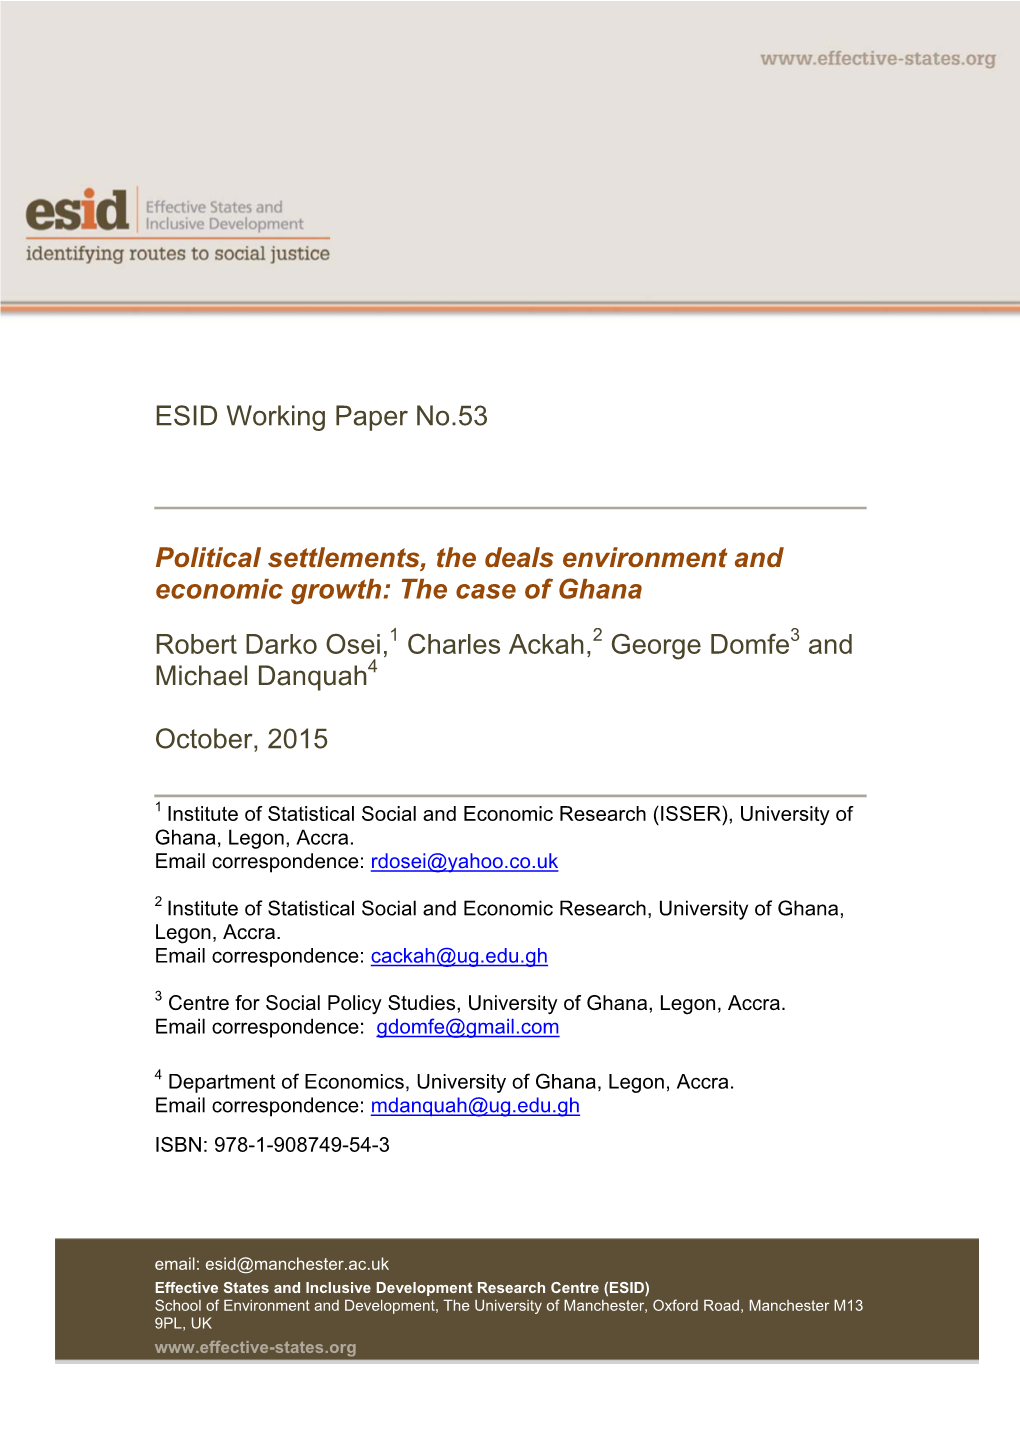 ESID Working Paper No.53 Political Settlements, the Deals Environment and Economic Growth: the Case of Ghana Robert Darko Osei